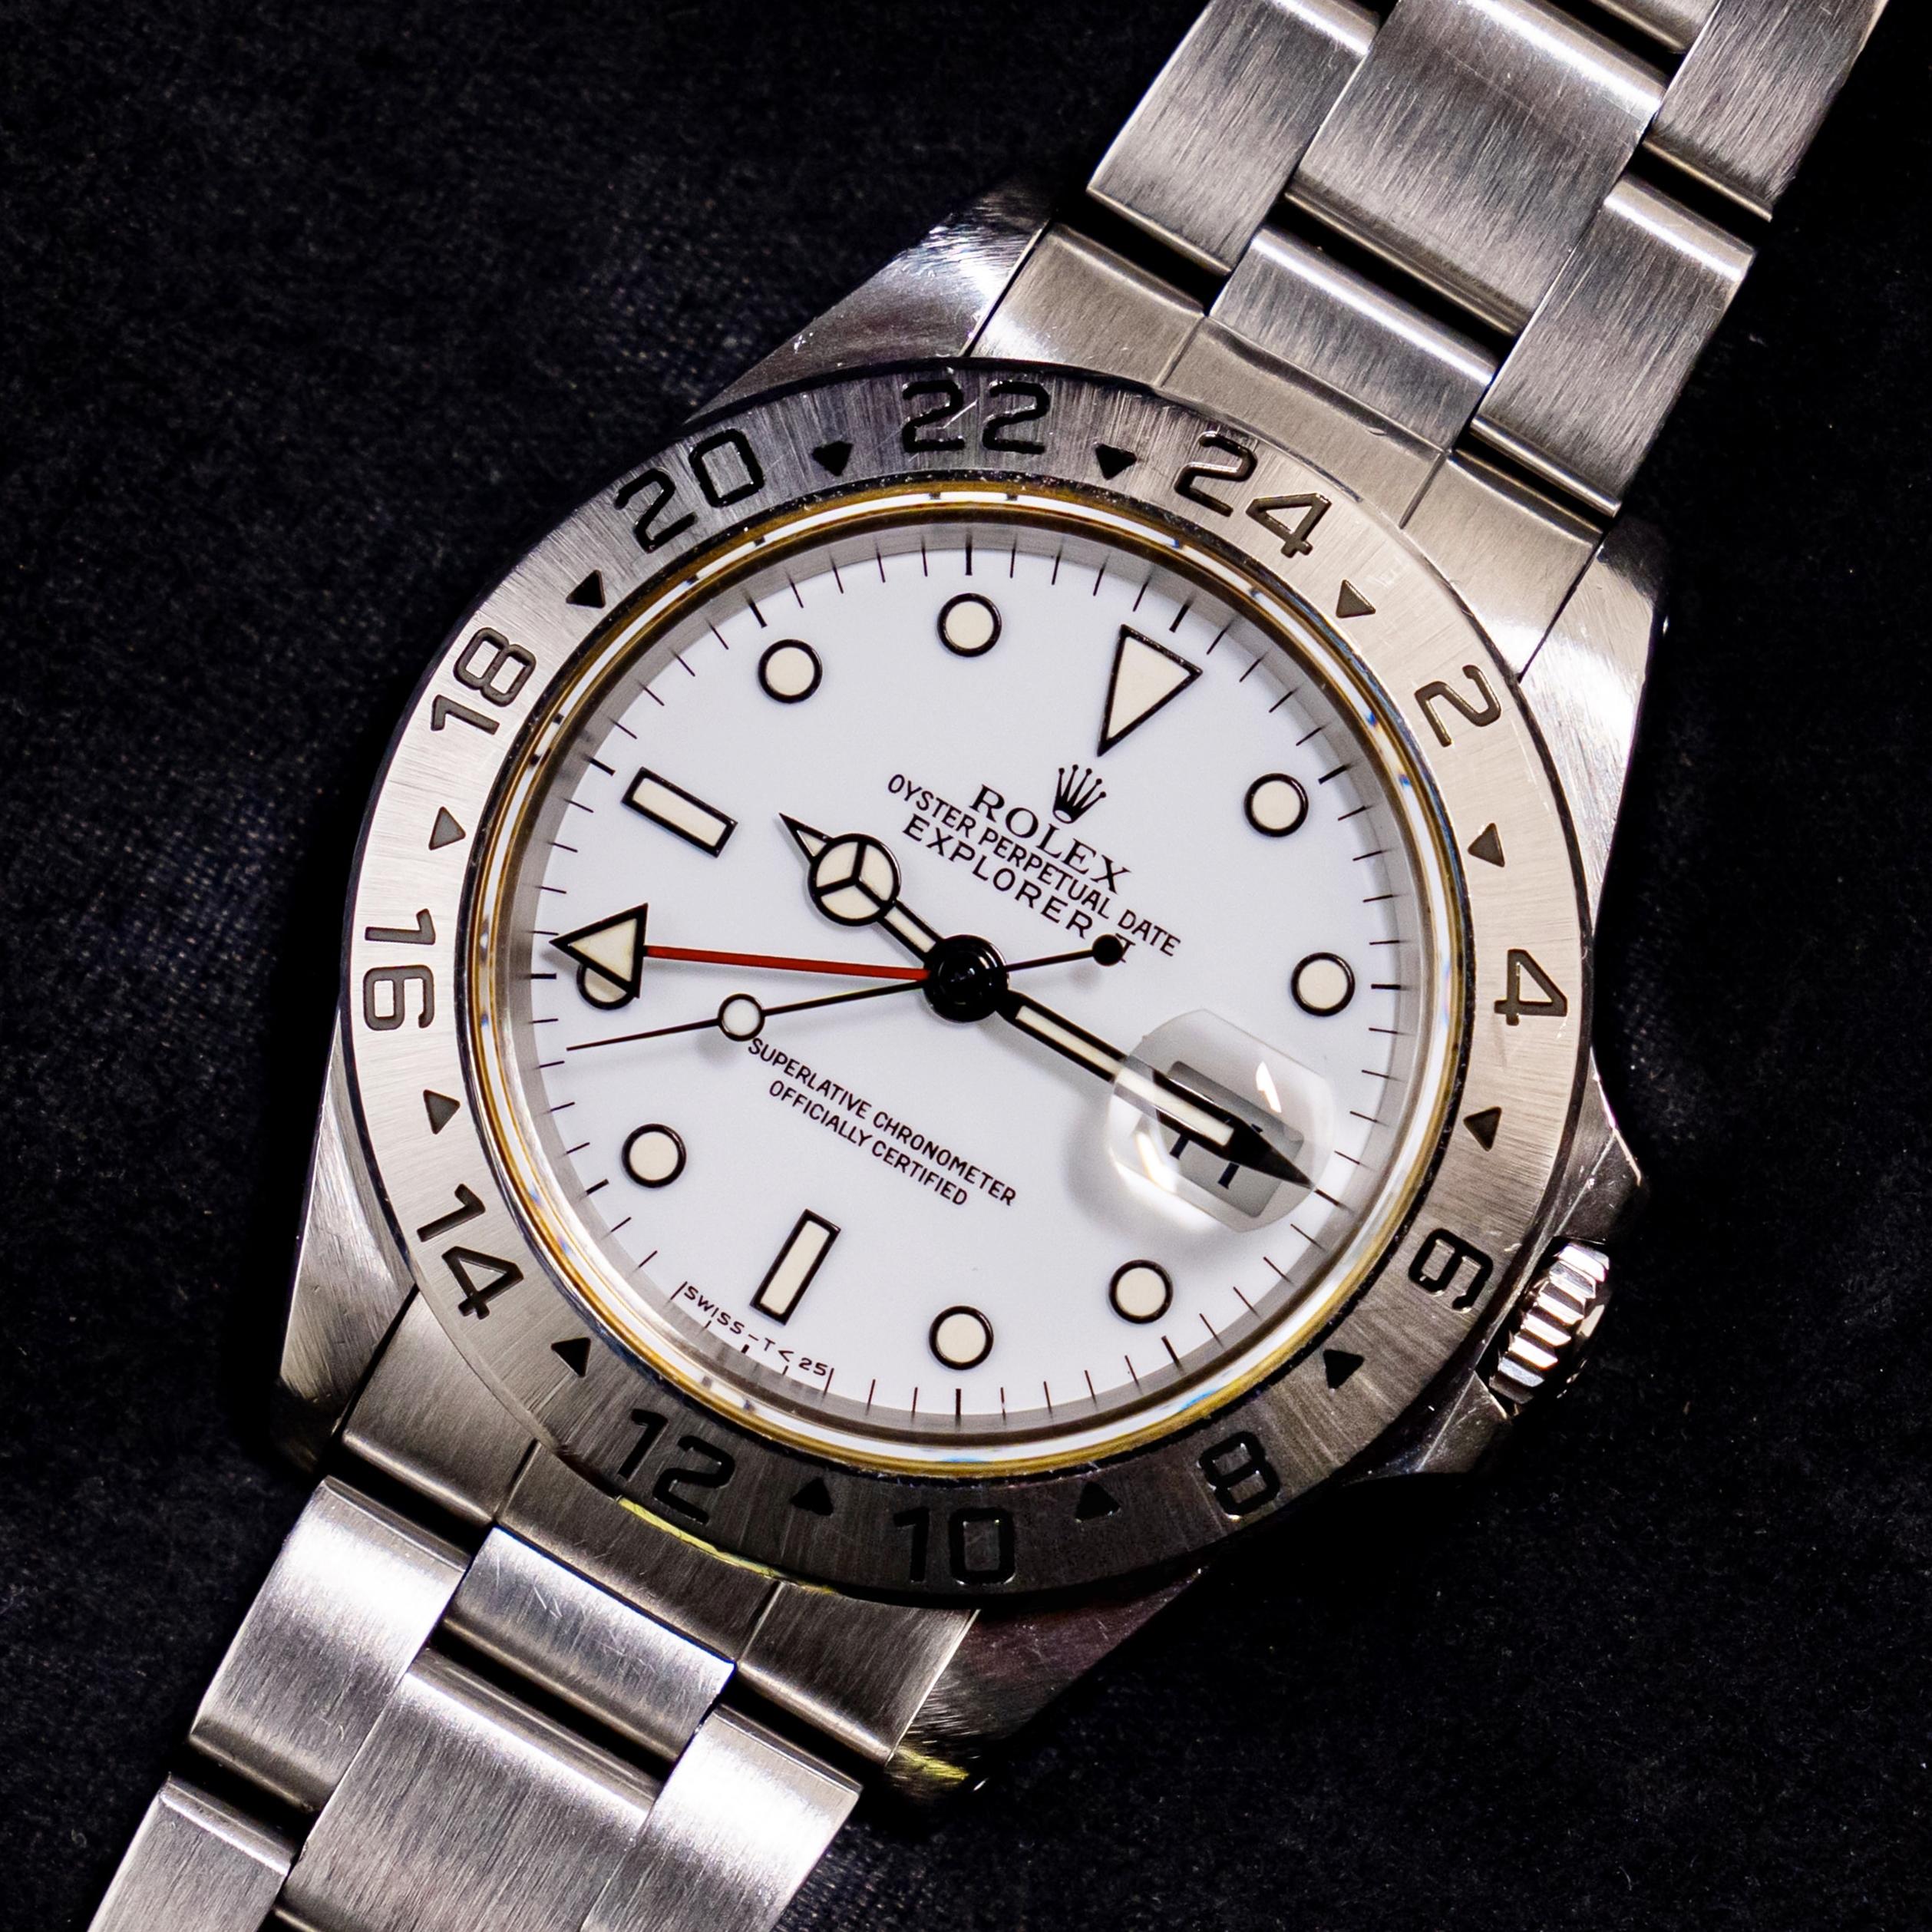 Brand: Rolex
Model: 16570
Year: 1995
Serial number: W6xxxxx
Reference: C03507

Case: Show sign of wear w/ slight polishing from previous; inner case back stamped 16570

Dial: Excellent Condition Tritium White Dial where the lumes have turned into